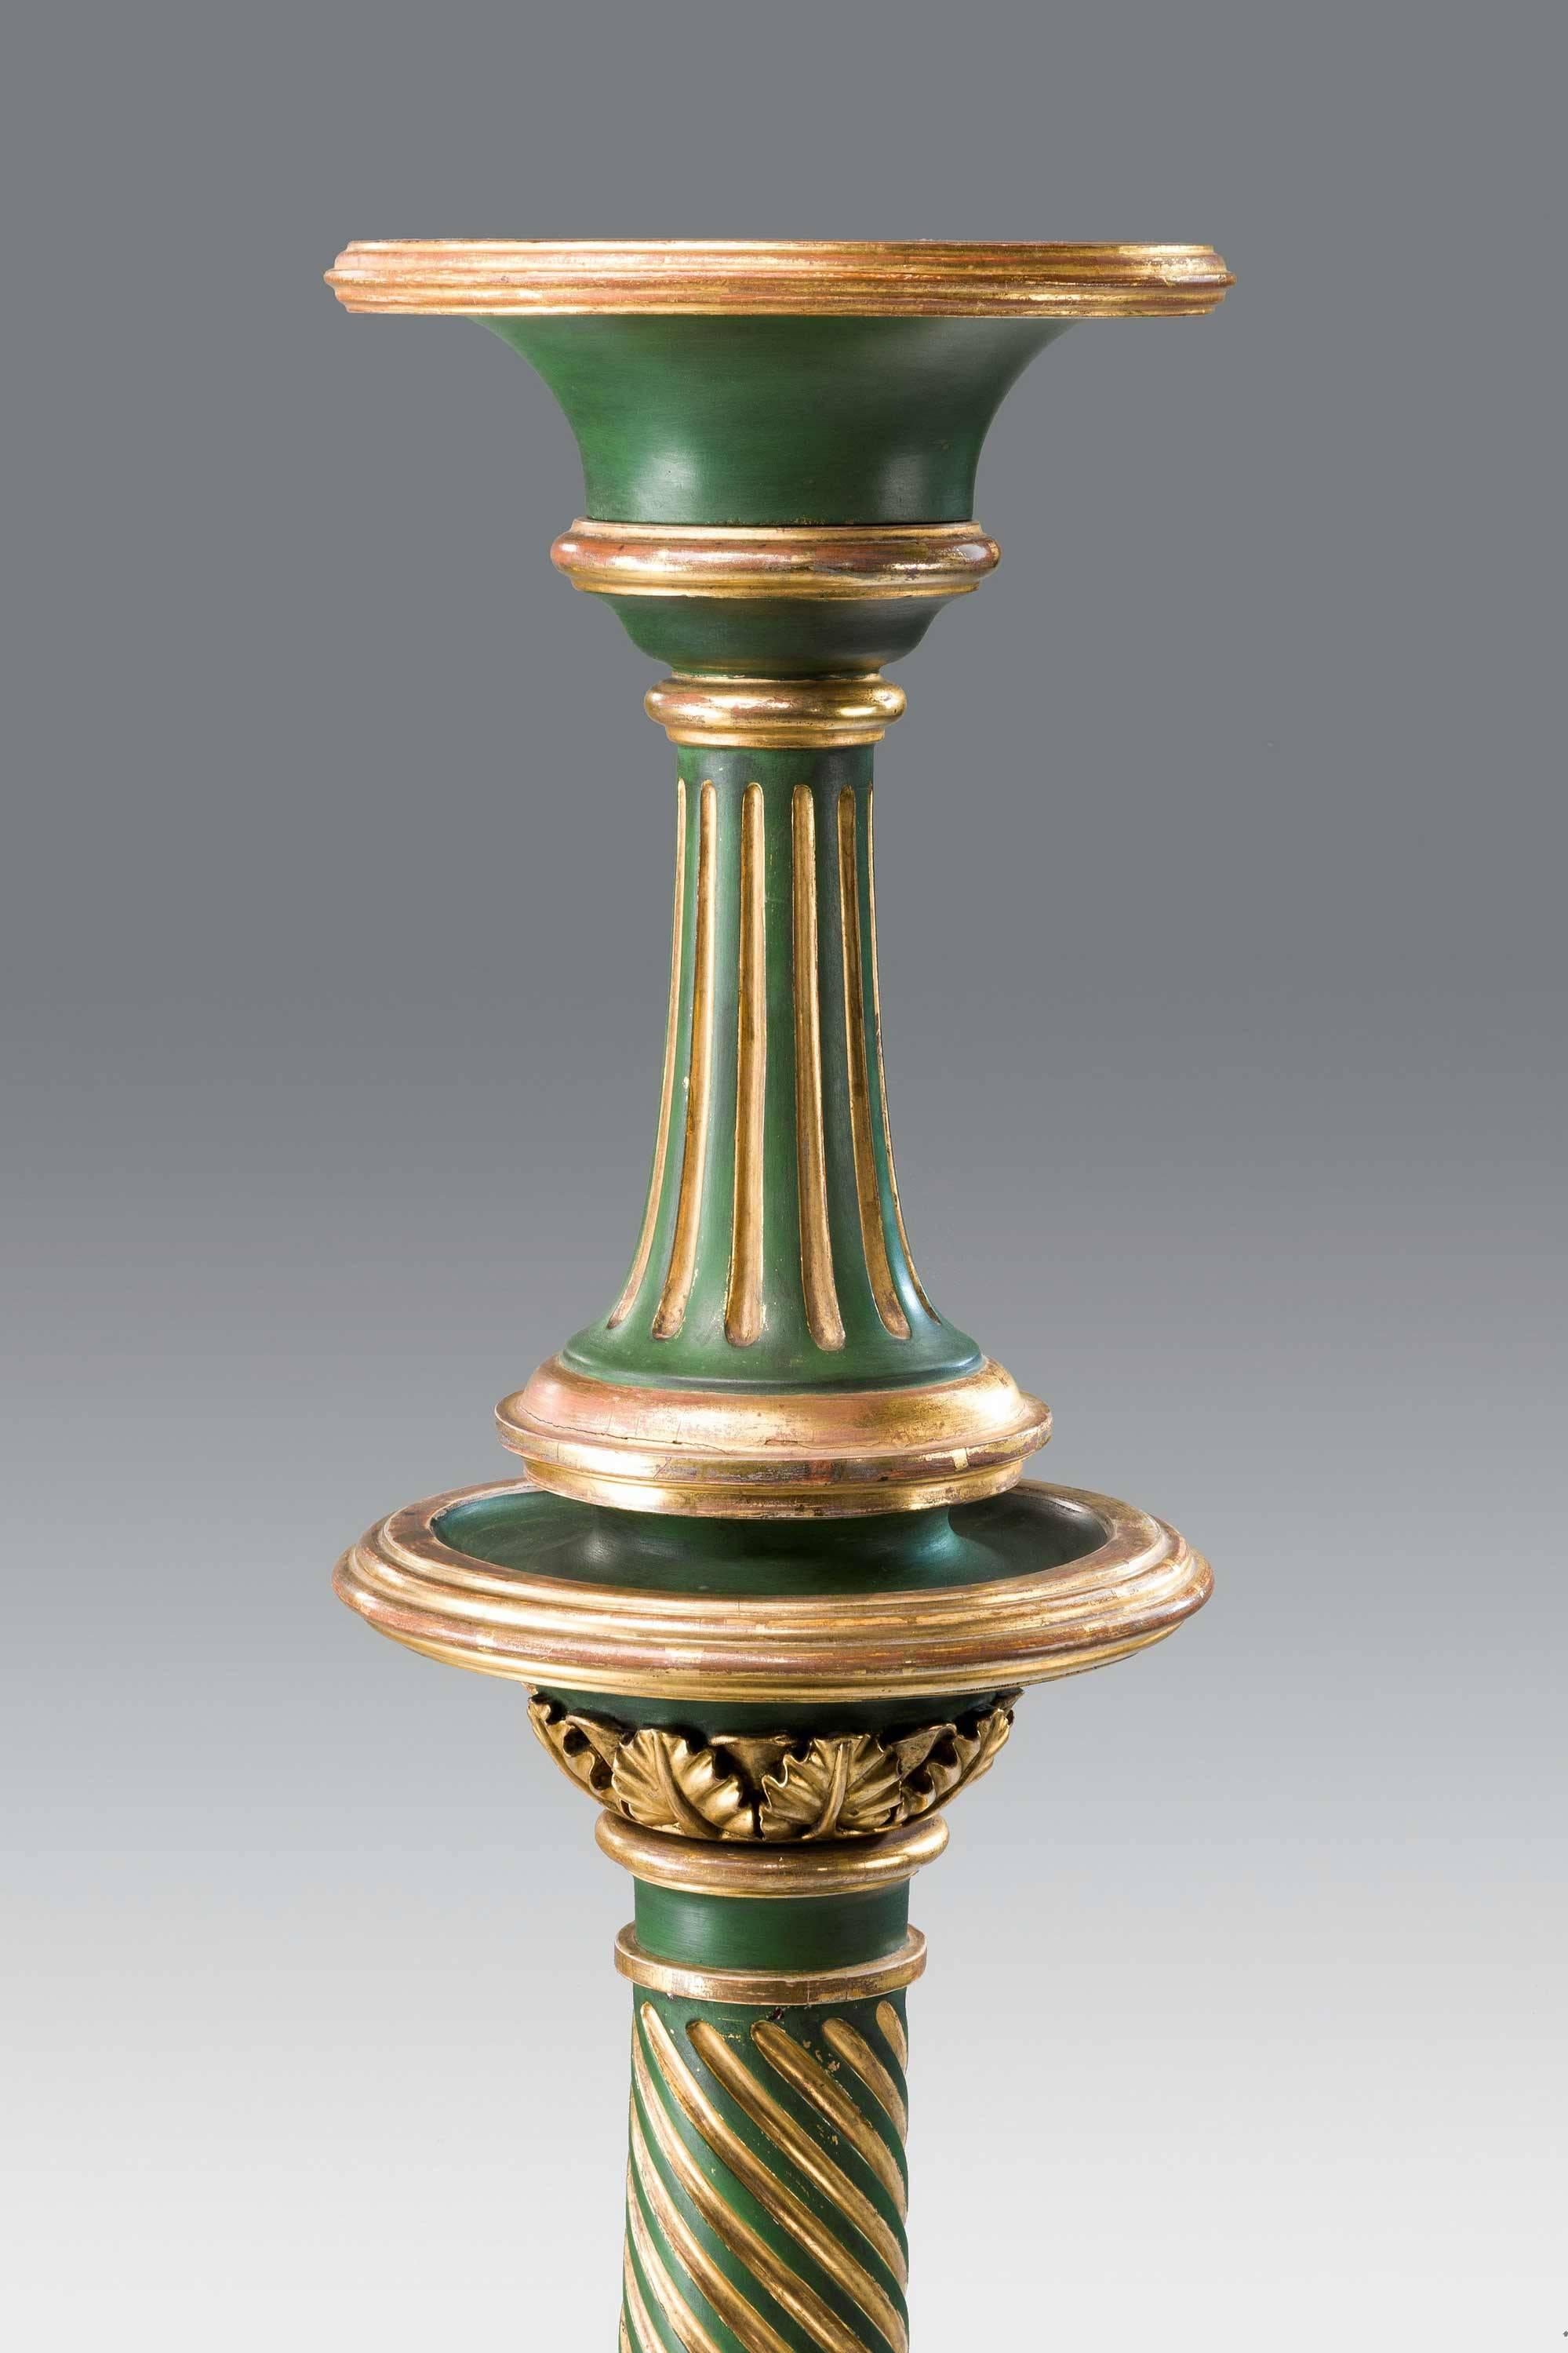 A fine pair of 19th century Regency period gilt and green decorated columns.